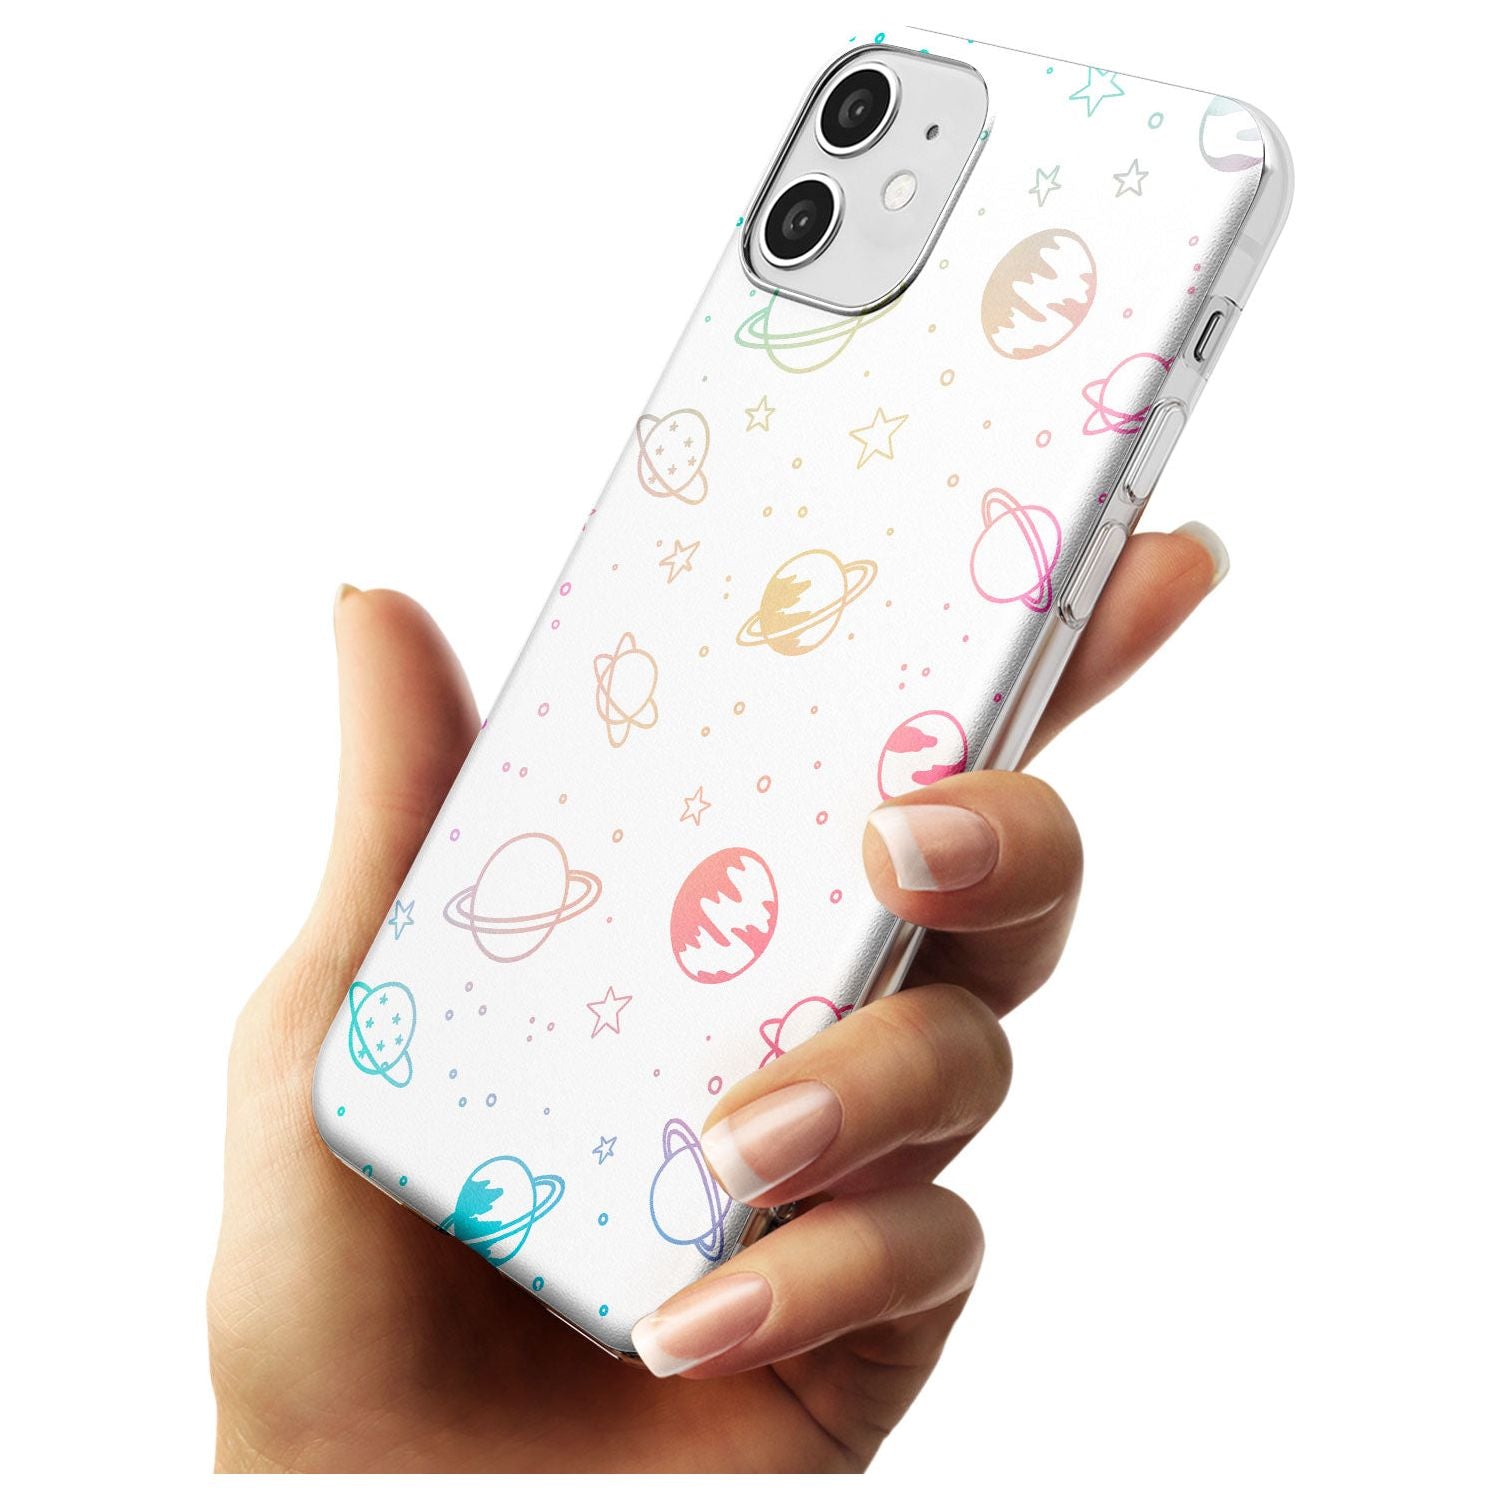 Outer Space Outlines: Pastels on White Black Impact Phone Case for iPhone 11